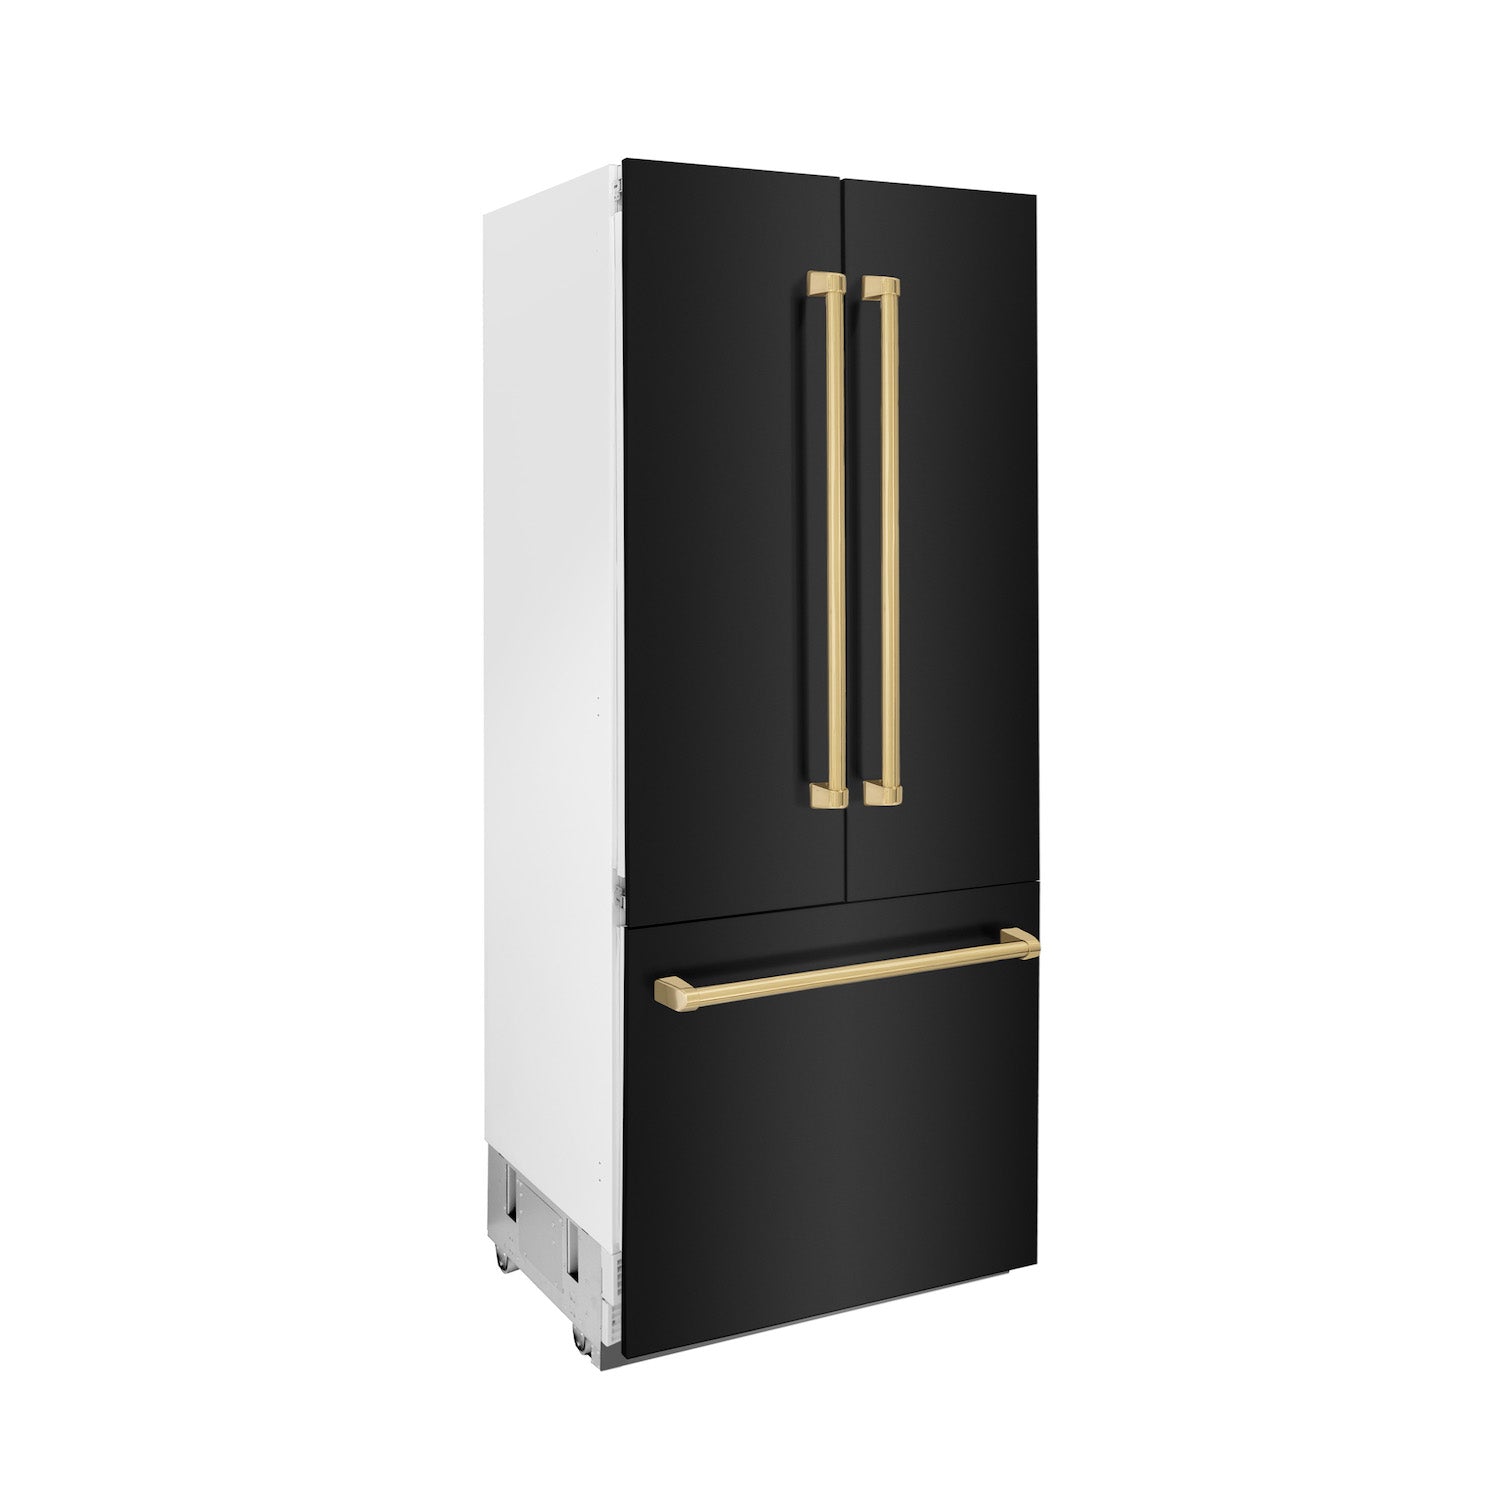 ZLINE 36" Autograph Edition Built-in French Door Refrigerator in Black Stainless Steel with Polished Gold Accents side.